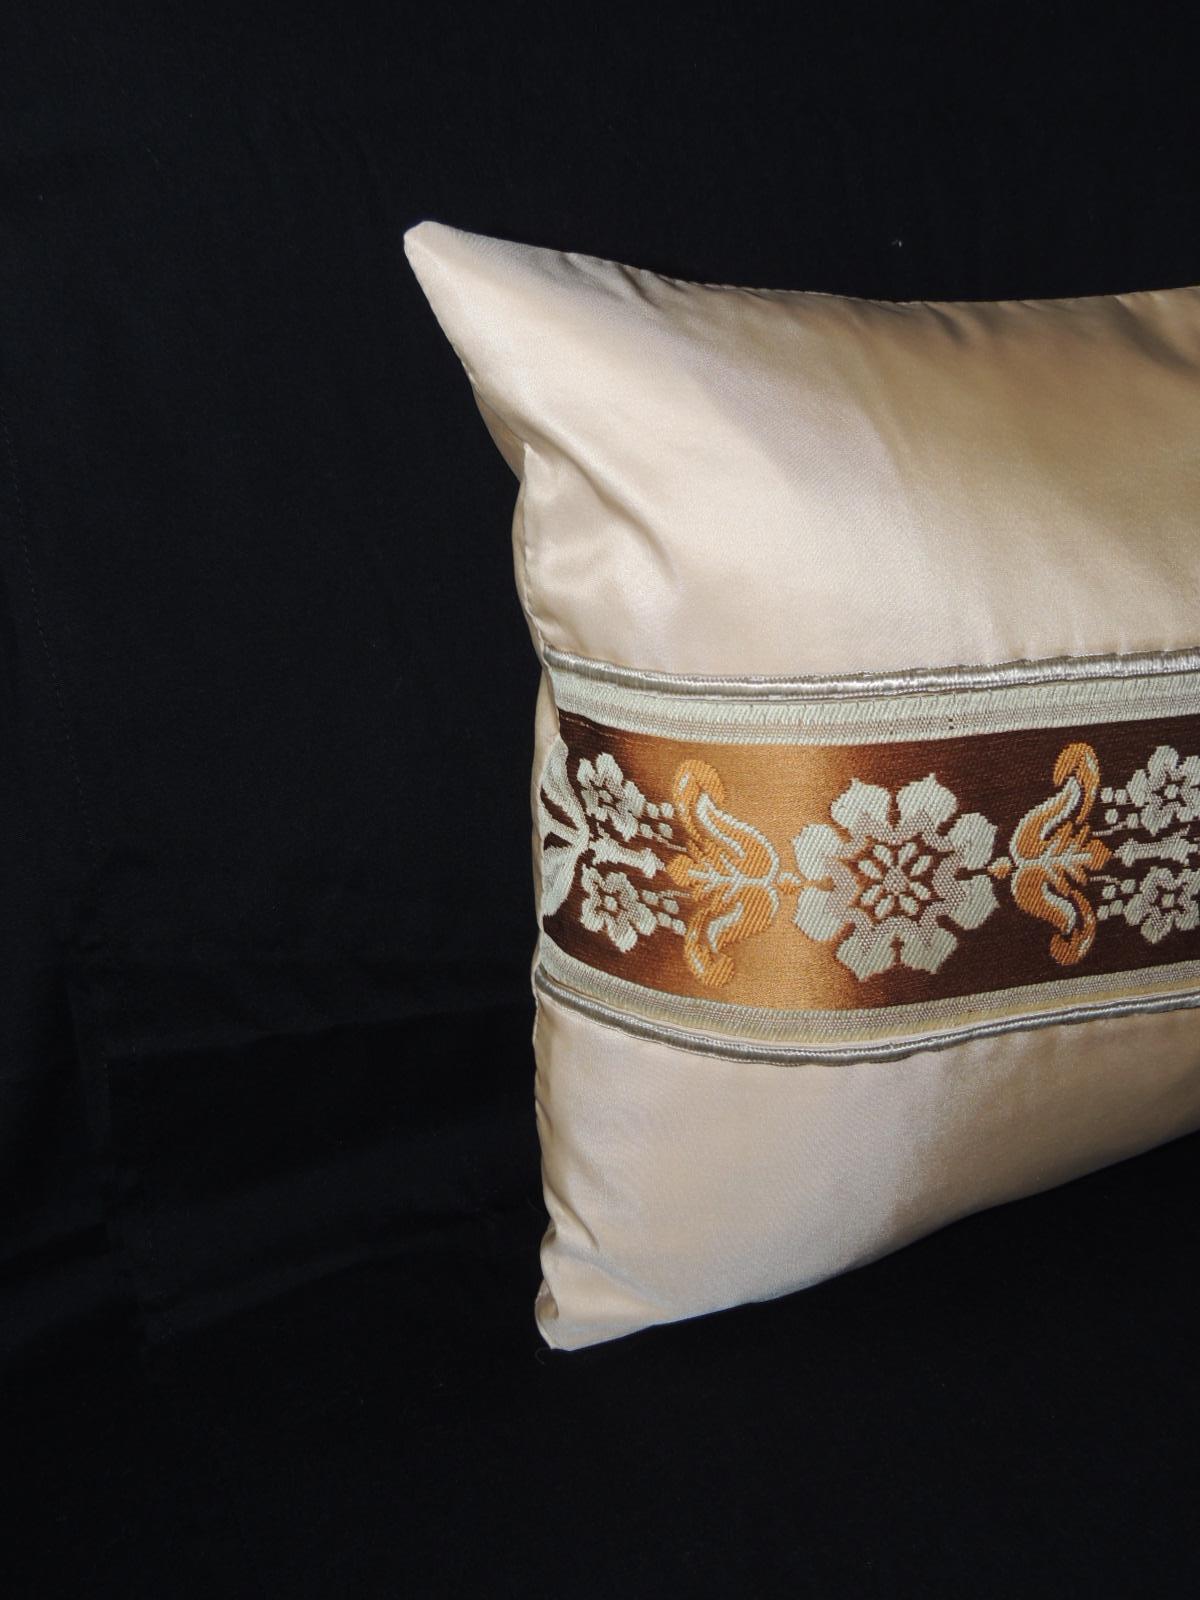 French silk ribbon lumbar decorative pillow handmade by adding a silk woven ribbon onto silk and for embellishment the ribbon has been framed by a peach color vintage silk textile and bordered with an antique silk metallic trim. This decorative